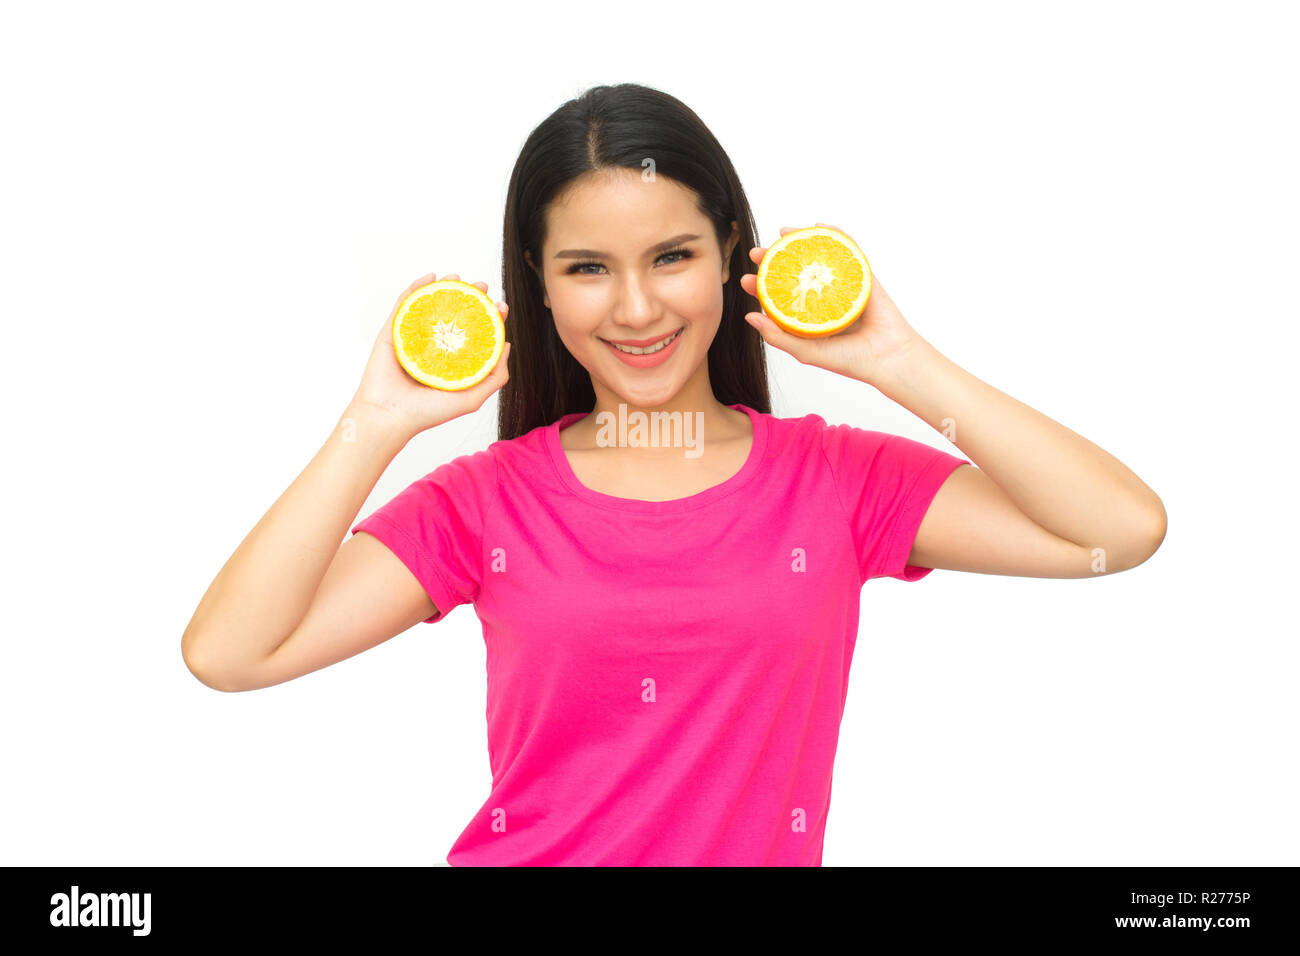 Health girl show yellow orange with smile face isolated on white background, healthy eating food concept Stock Photo